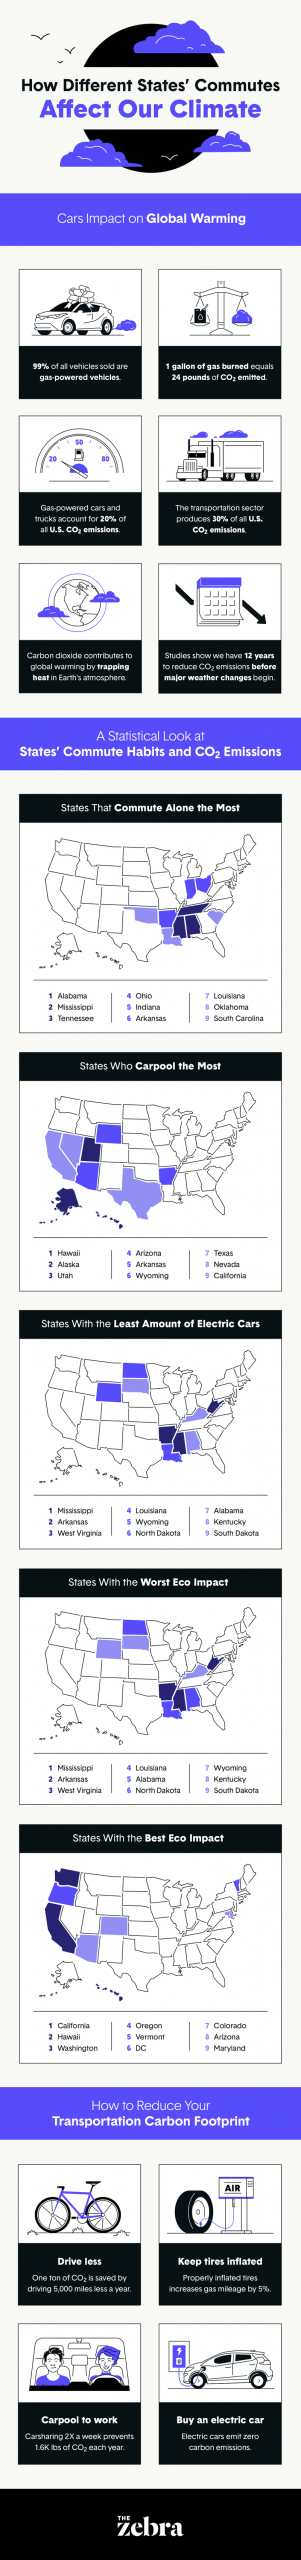 how different states commutes affect our clima.width 800